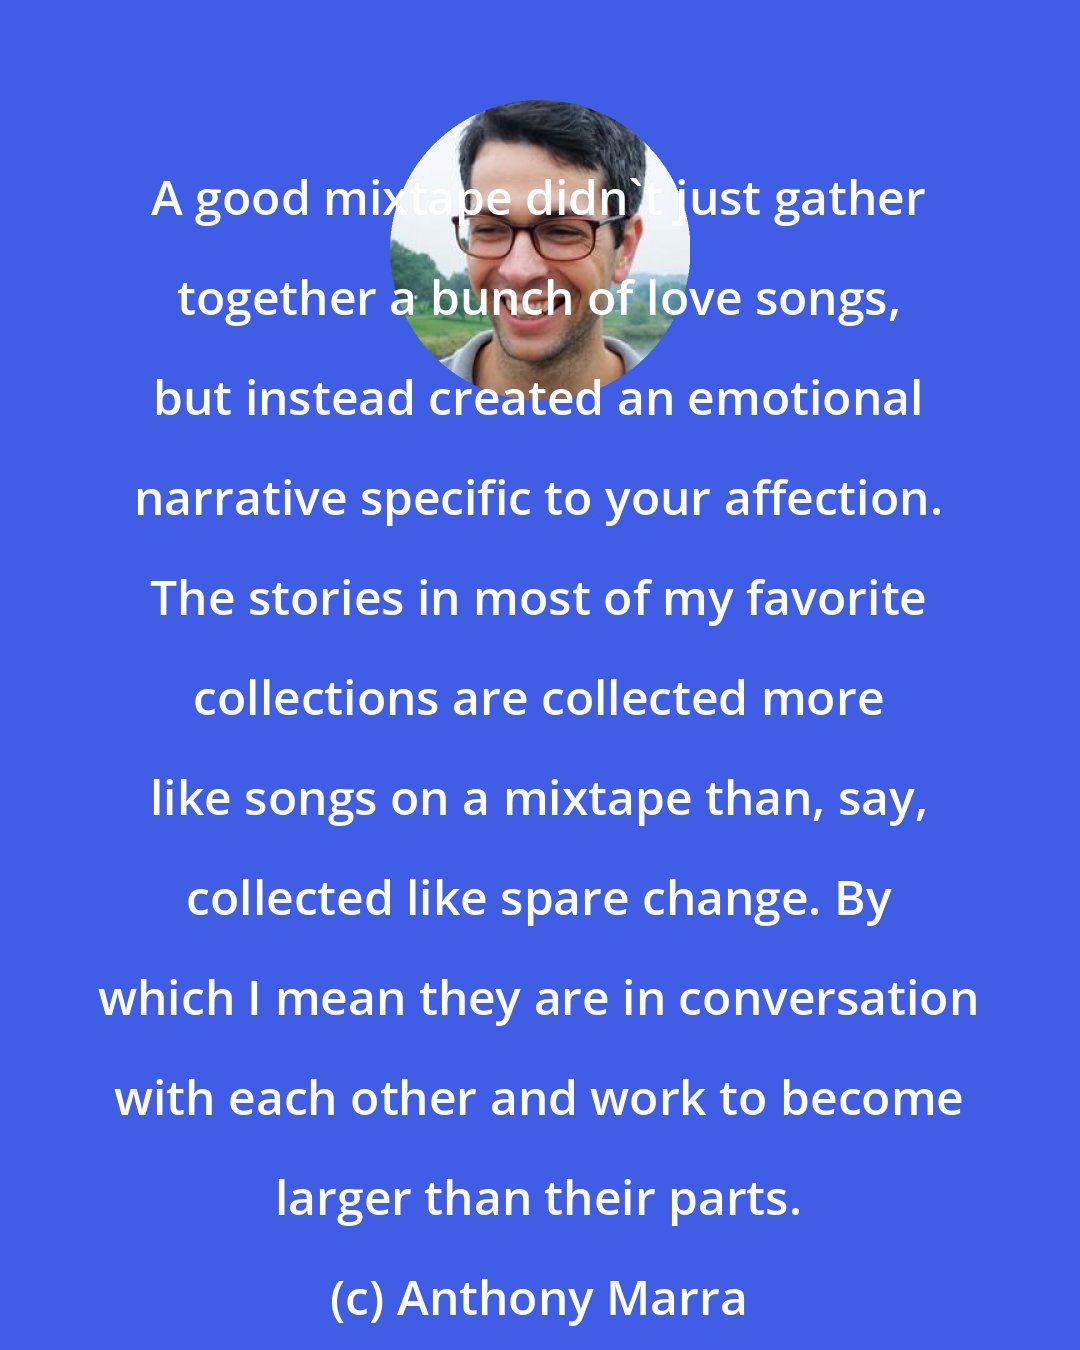 Anthony Marra: A good mixtape didn't just gather together a bunch of love songs, but instead created an emotional narrative specific to your affection. The stories in most of my favorite collections are collected more like songs on a mixtape than, say, collected like spare change. By which I mean they are in conversation with each other and work to become larger than their parts.